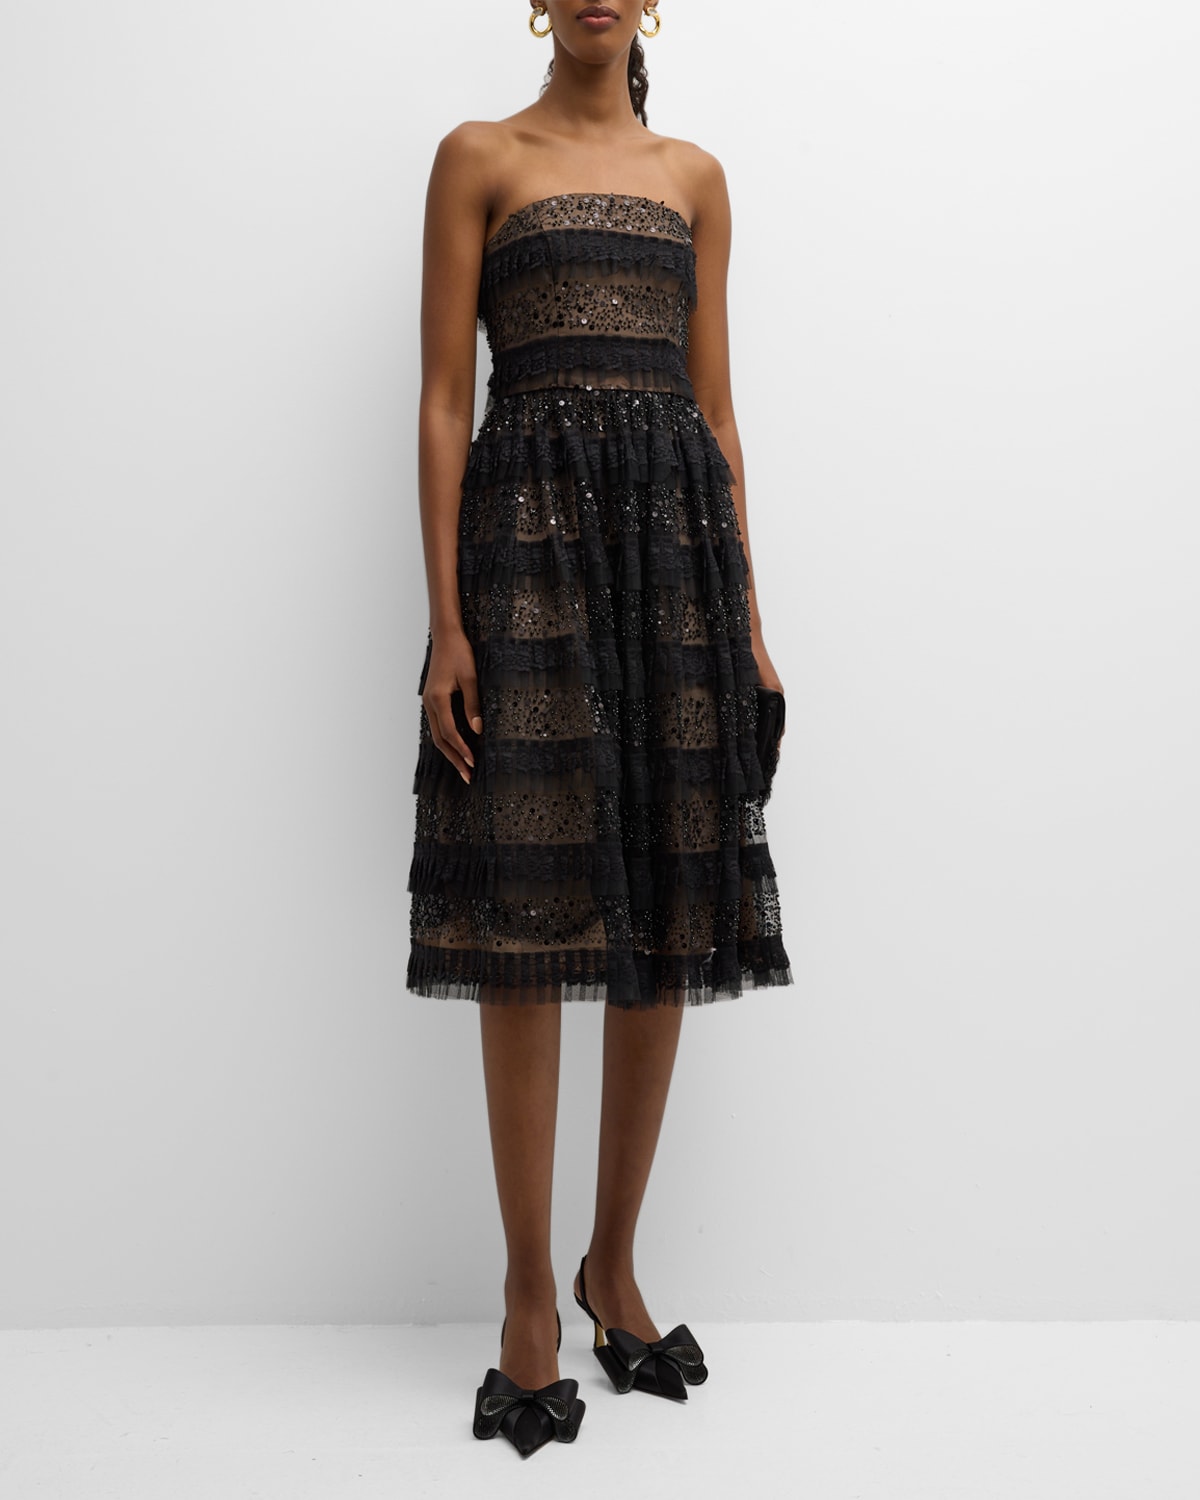 Dress The Population Black Label Ruby Tiered Strapless Bead & Sequin Midi Dress In Black-nude